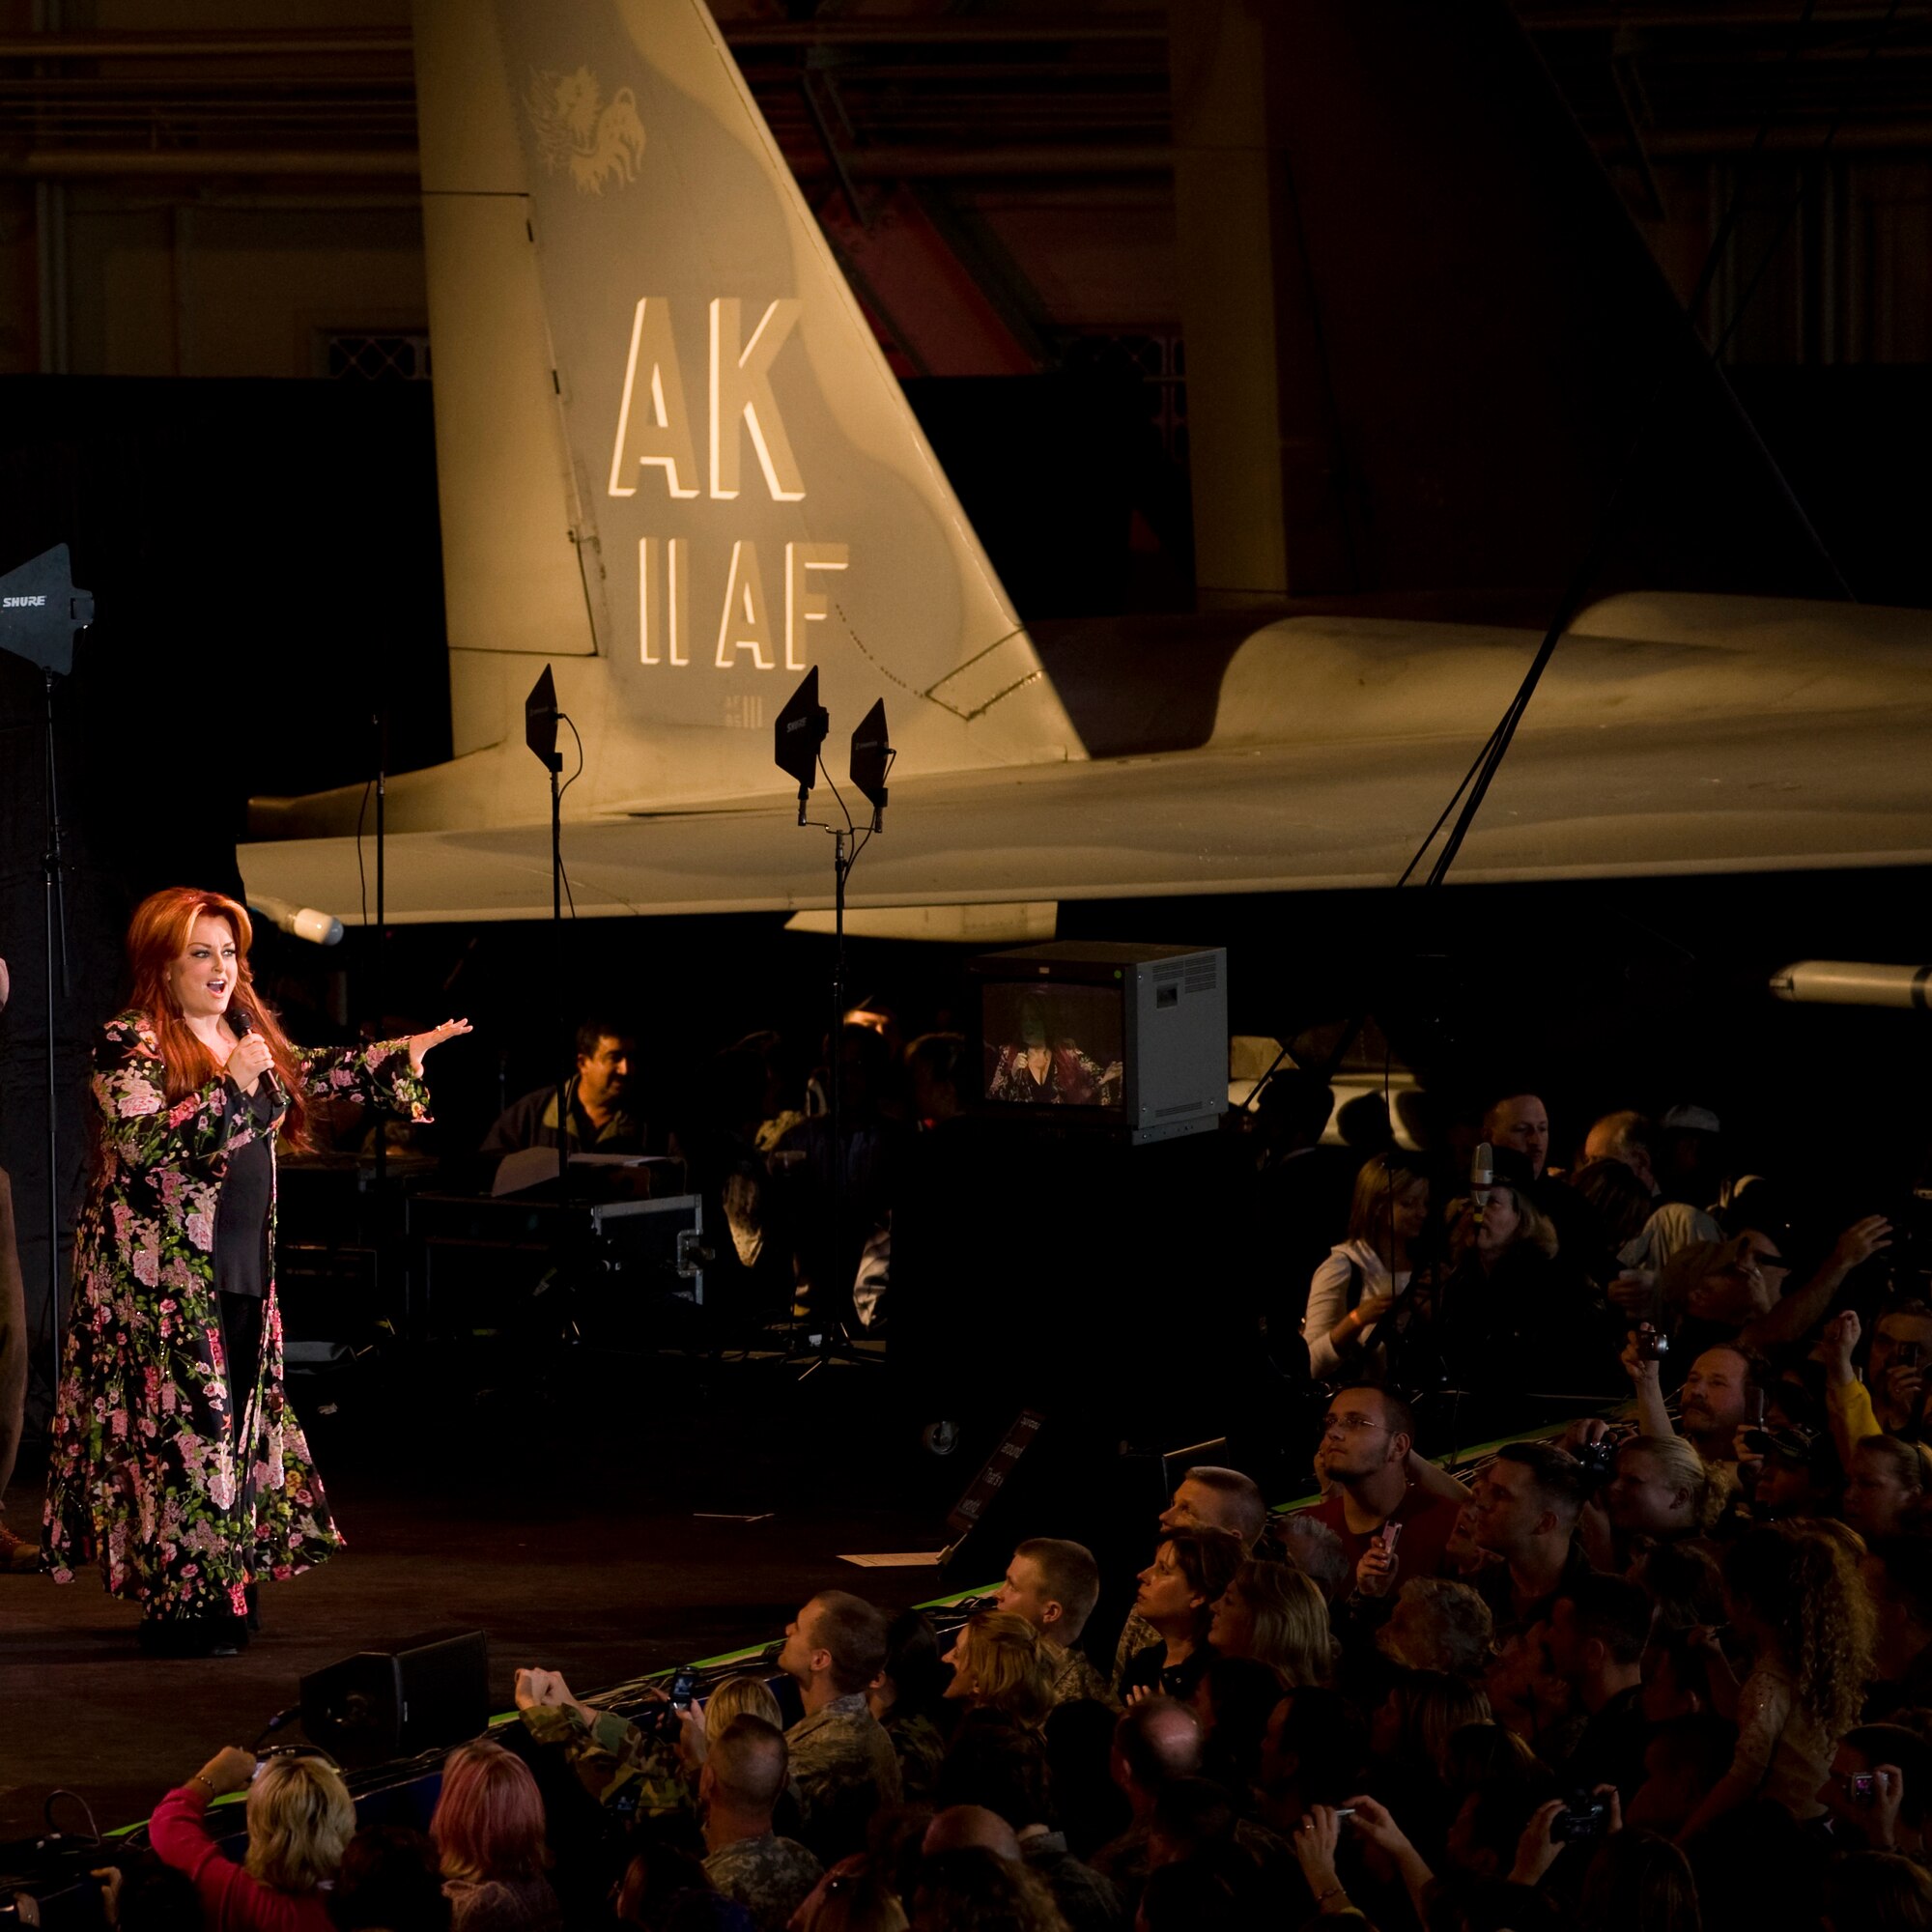 ELMENDORF AIR FORCE BASE, Alaska -- Country Singer Wynonna Judd performs a free concert for the members of the military and Alaska crowd in Hanger 2 during "Alaska's Concert for the Military" June 27, as part of the Alaska's 50th Statehood celebration. (U.S Air Force photo byTech. Sgt. Alan Port)